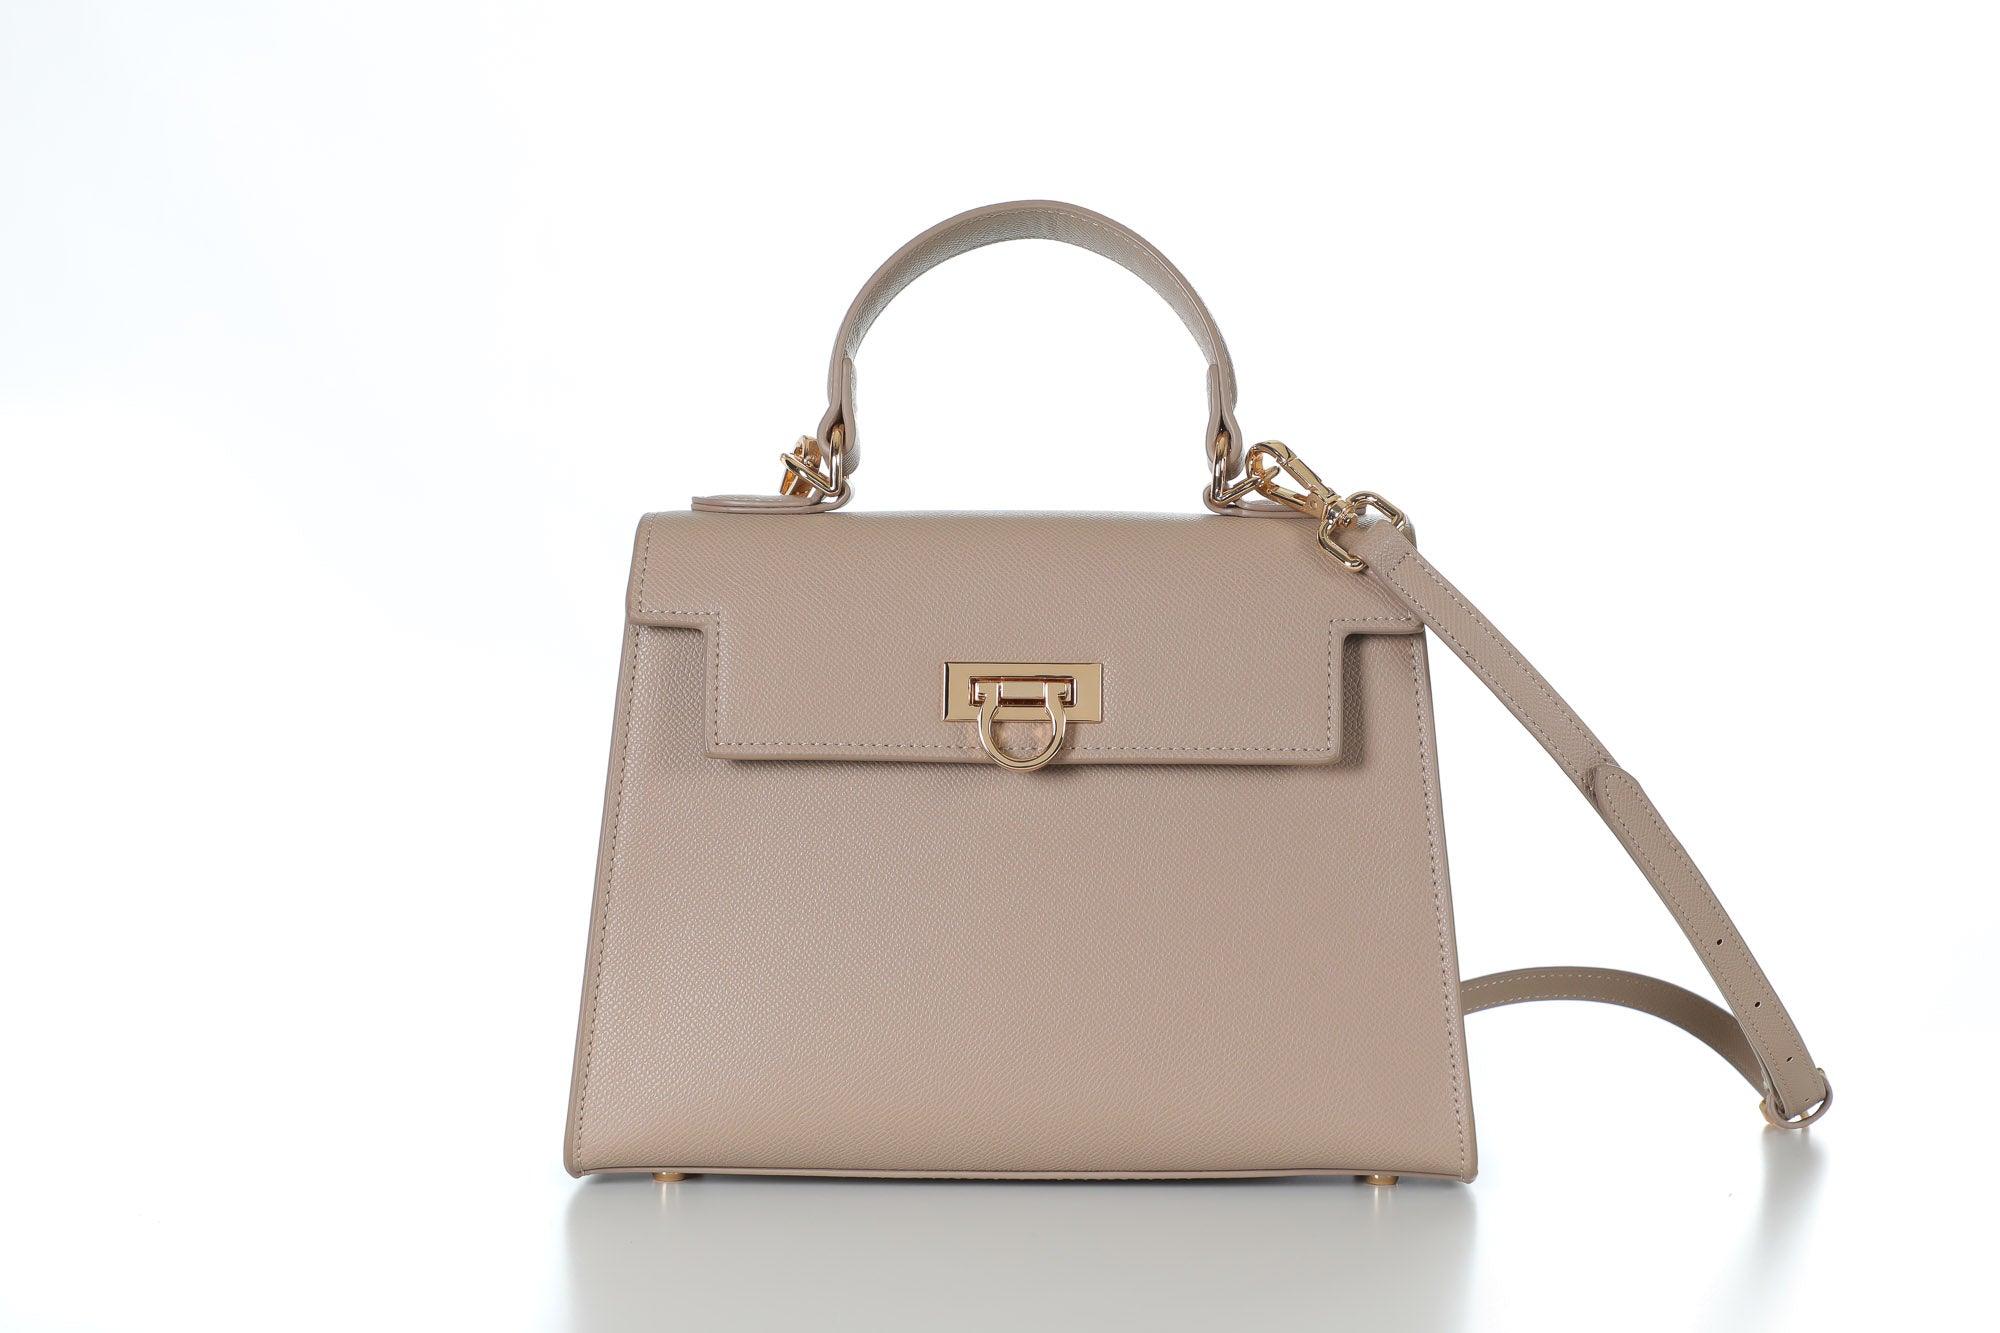 Classic Taupe Levantine Bag: Refined classic Levantine bag in soft taupe